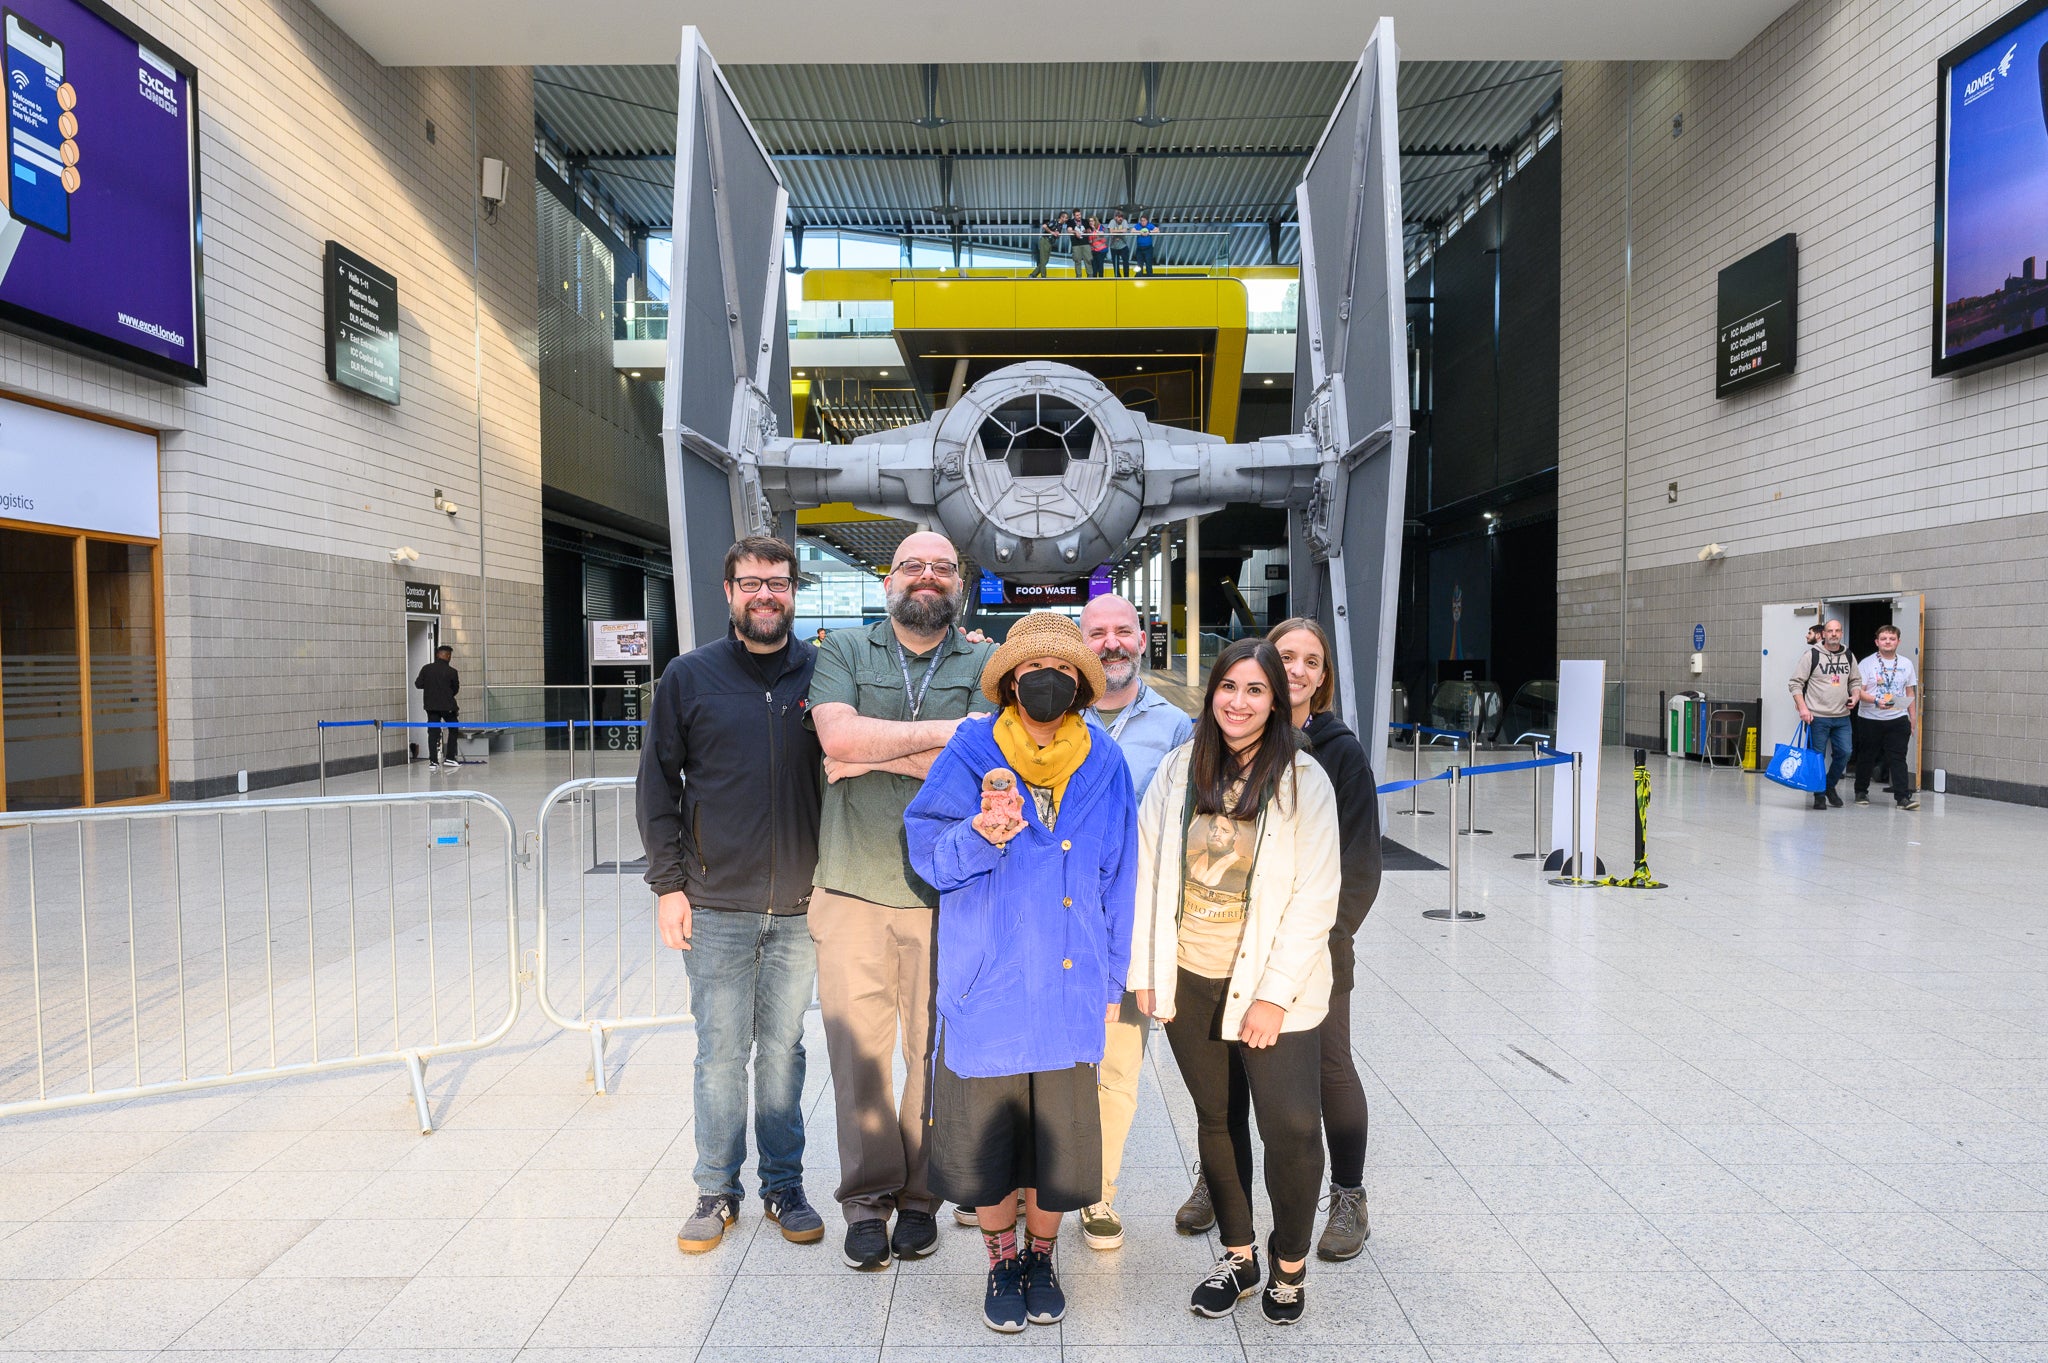 Photograph of Popverse team in front of a Tie Fighter